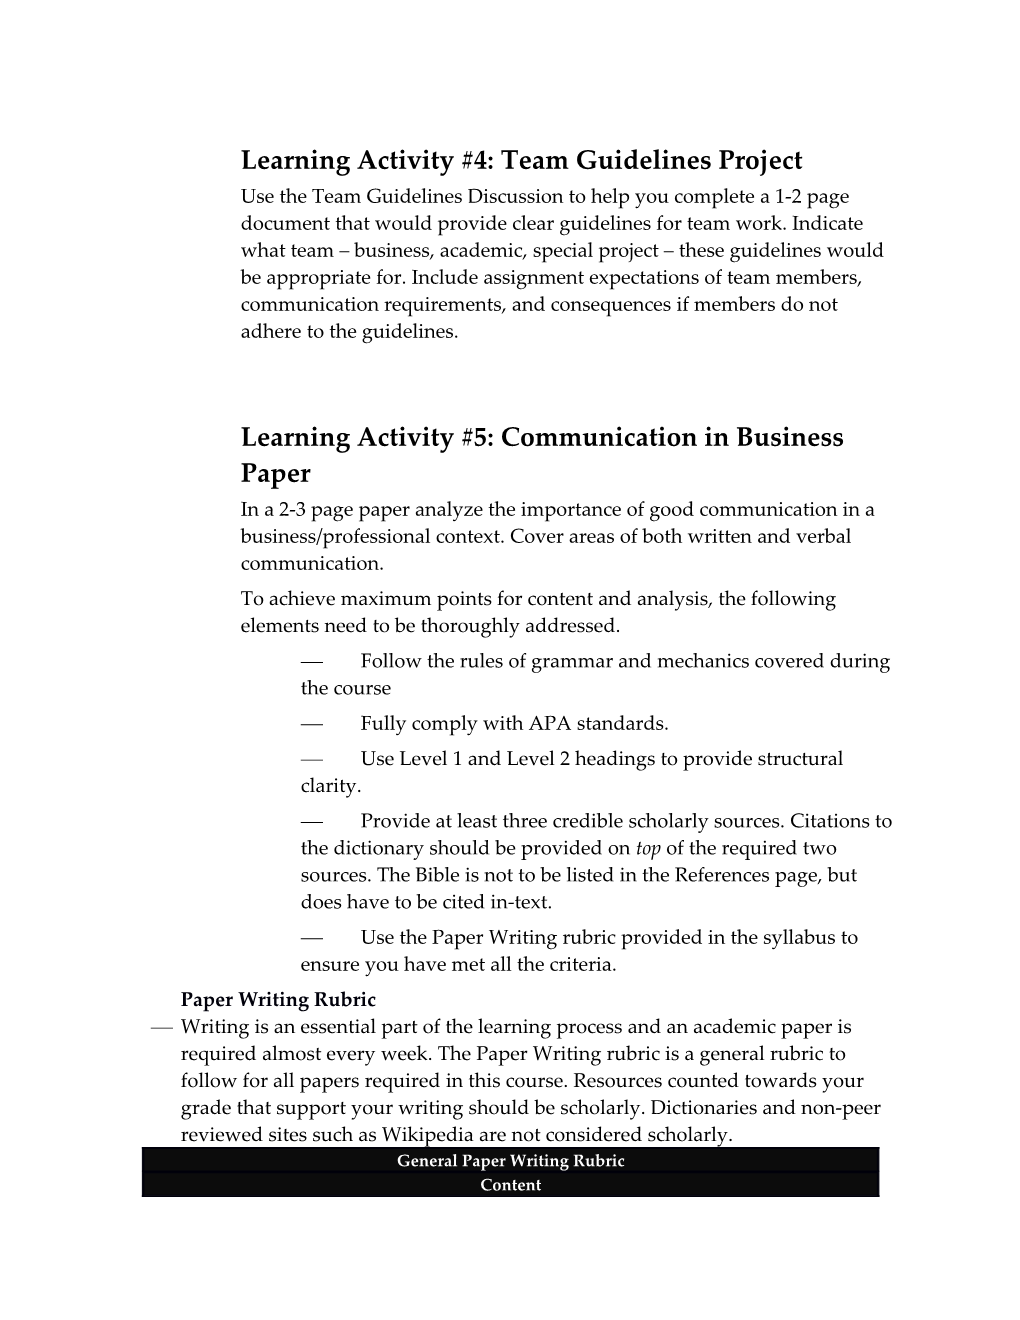 Learning Activity #4: Team Guidelines Project